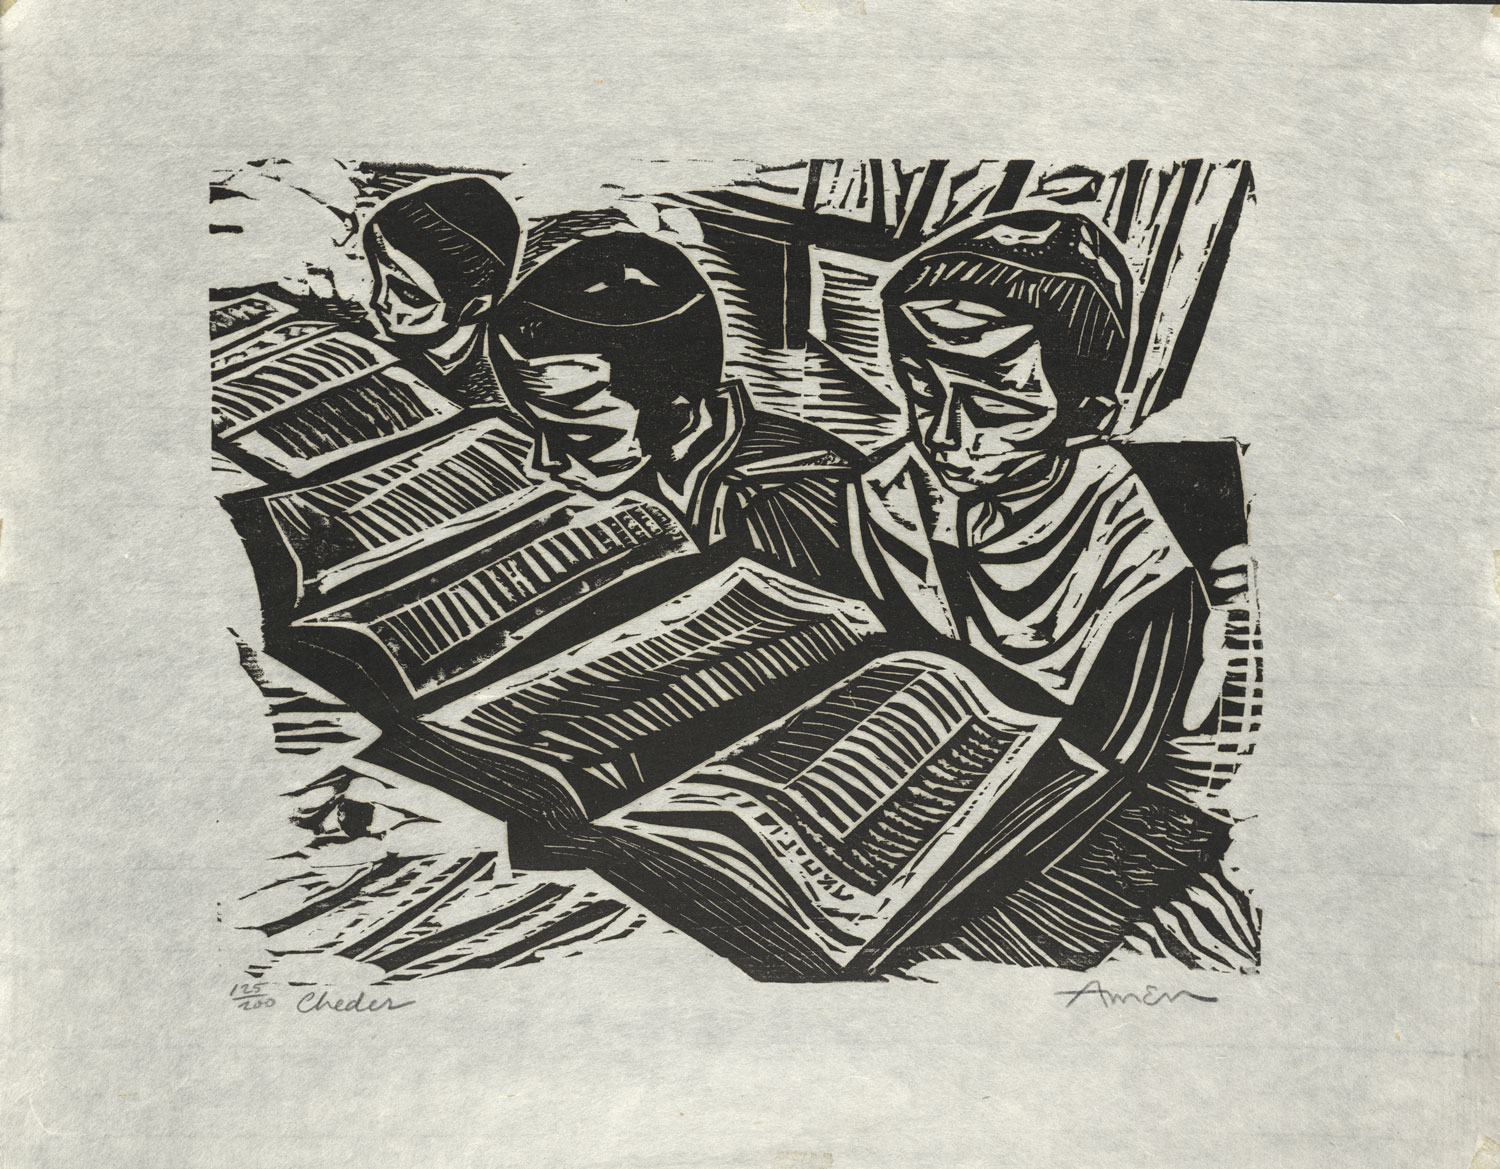 Cheder woodcut